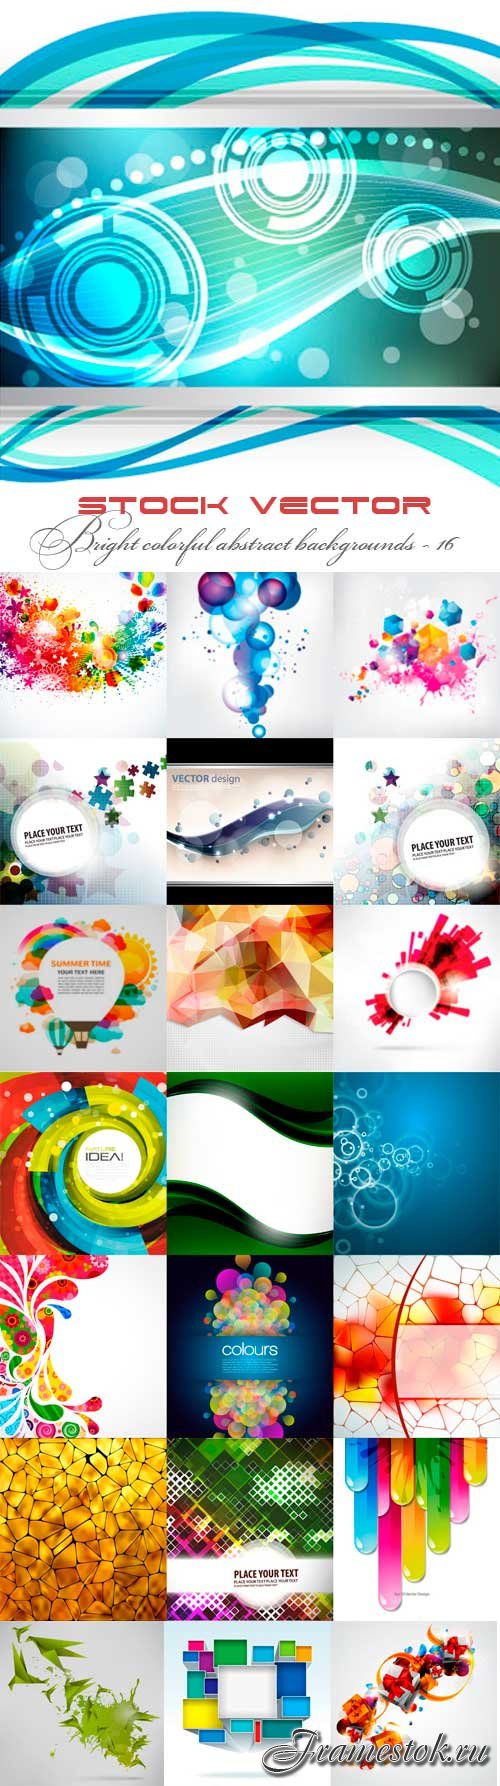 Bright colorful abstract backgrounds vector - 16